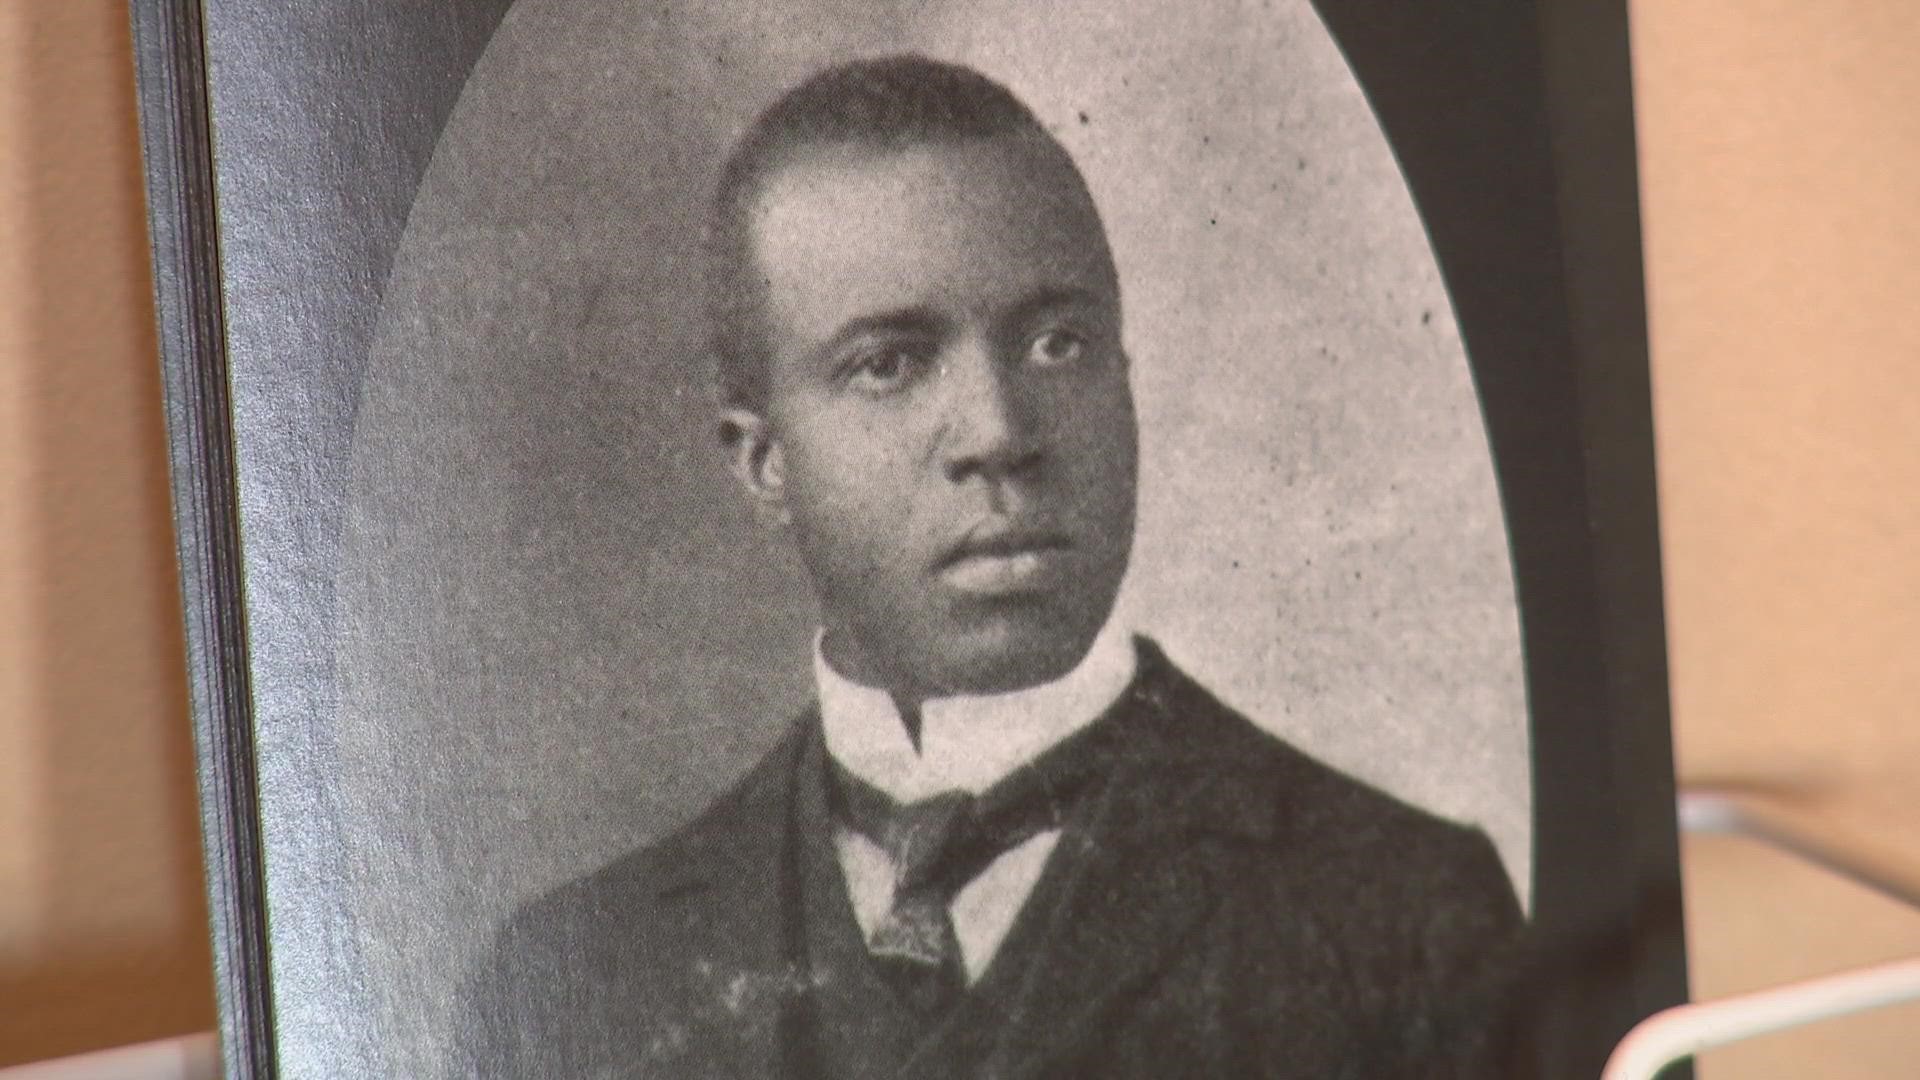 Composer Scott Joplin called St. Louis home more than a century ago. One young musician is reintroducing Joplin's music to the 21st century.